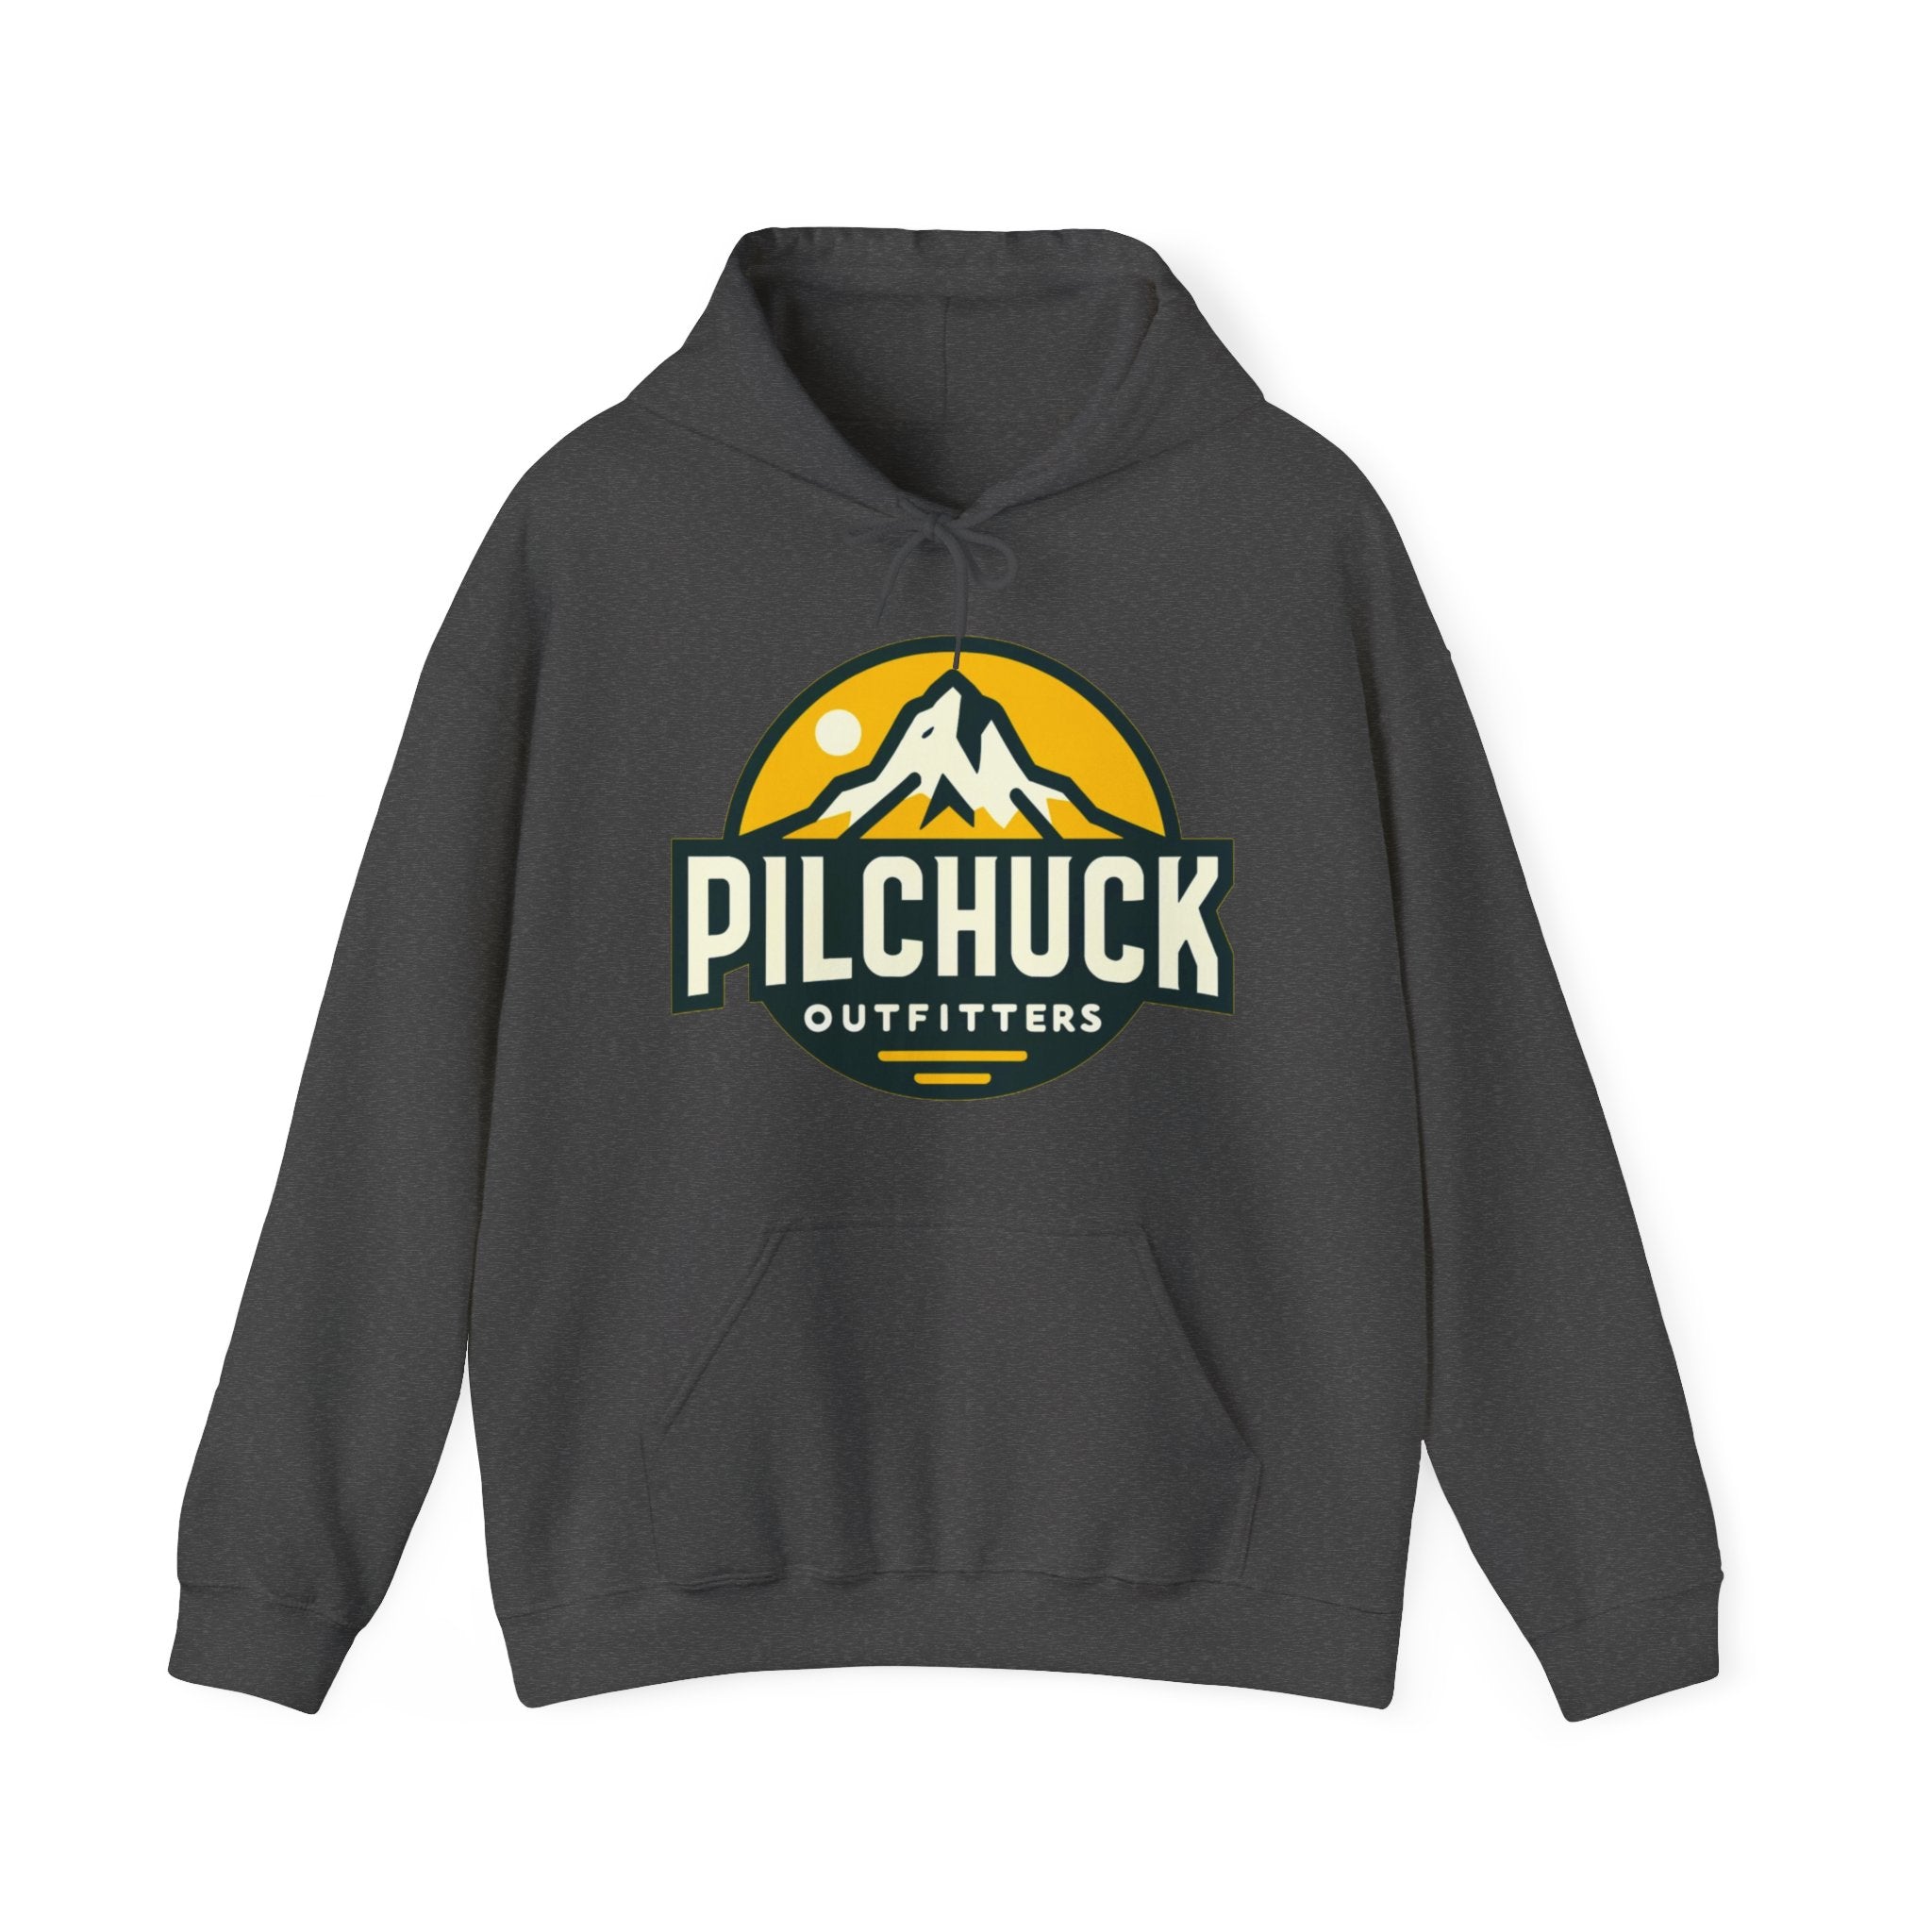 Classic Big Logo Pilchuck Outfitters Unisex Heavy Blend Hooded Sweatshirt